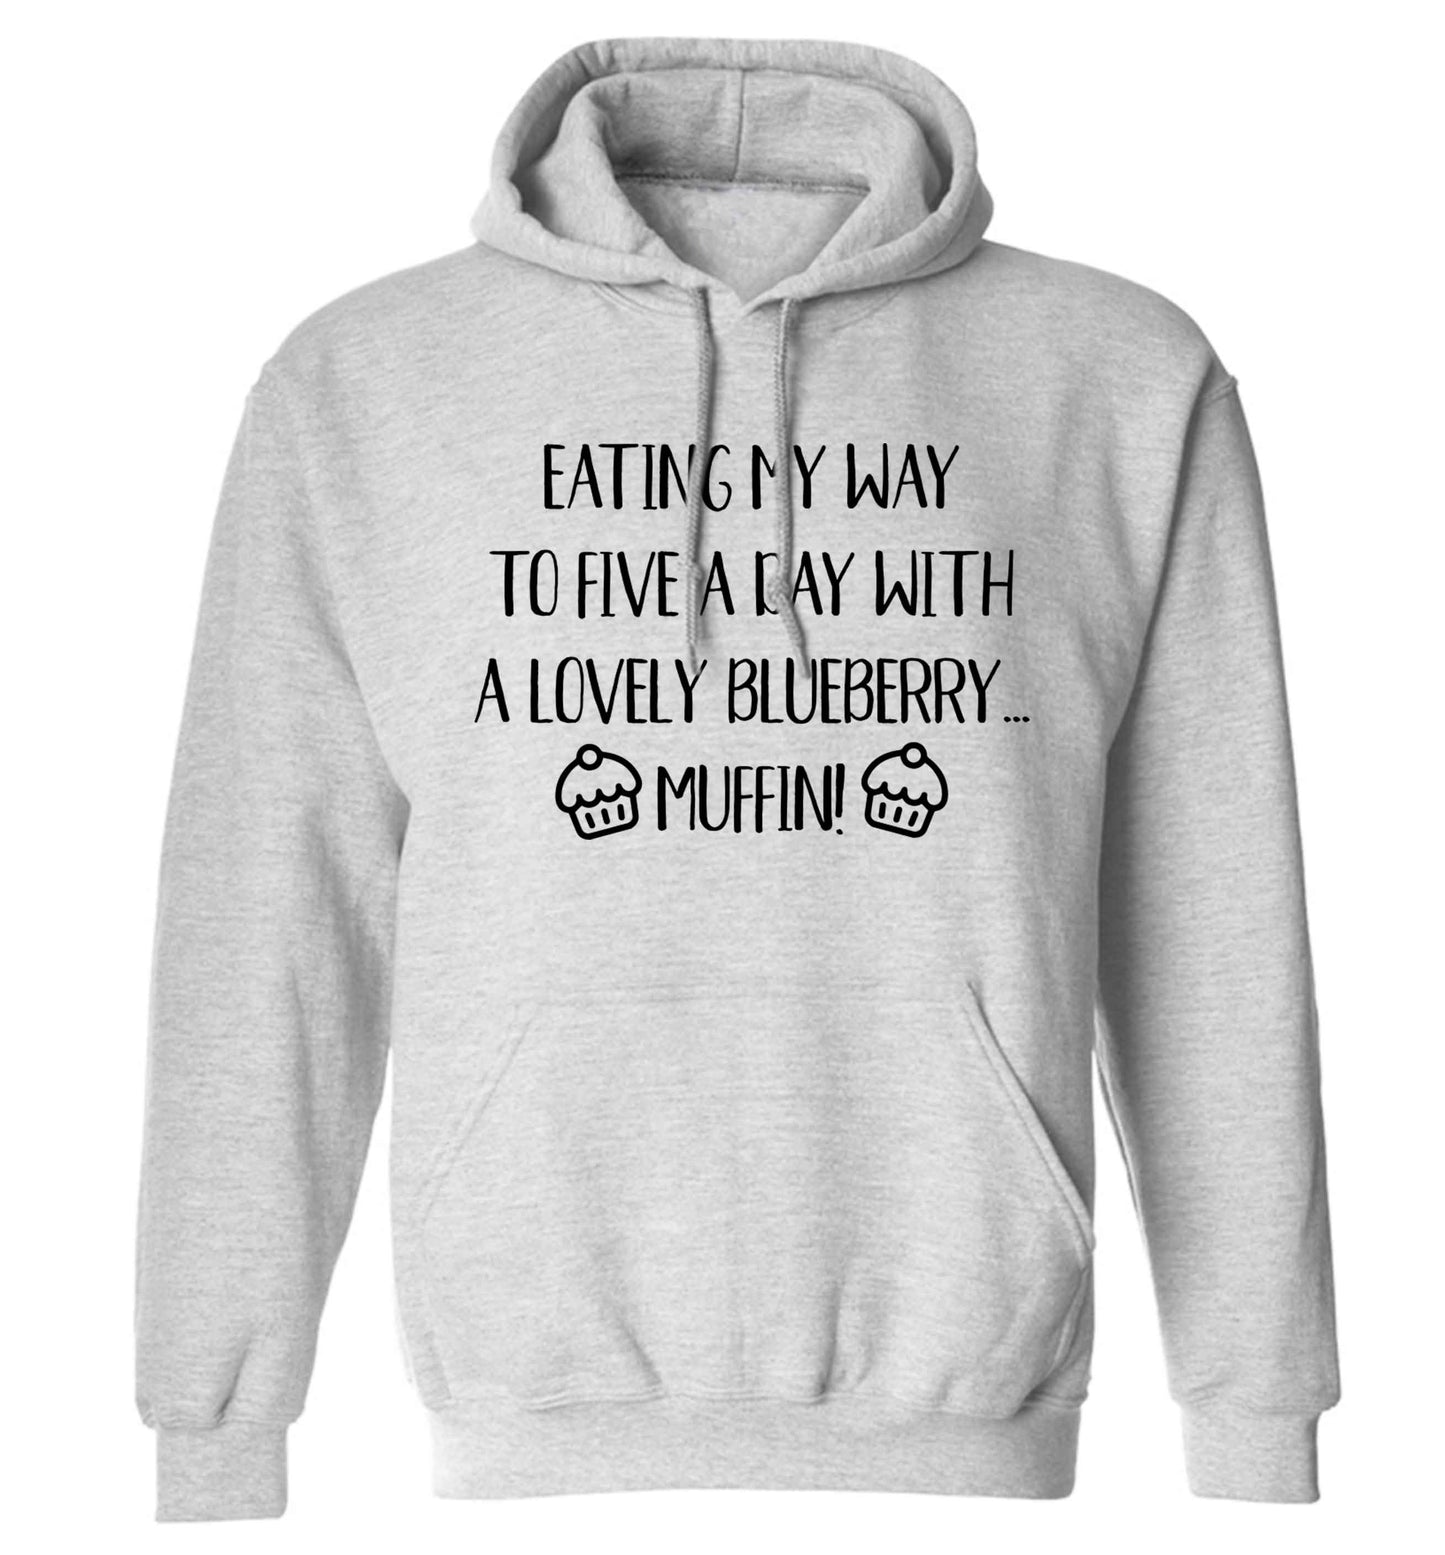 Eating my way to five a day with a lovely blueberry muffin adults unisex grey hoodie 2XL